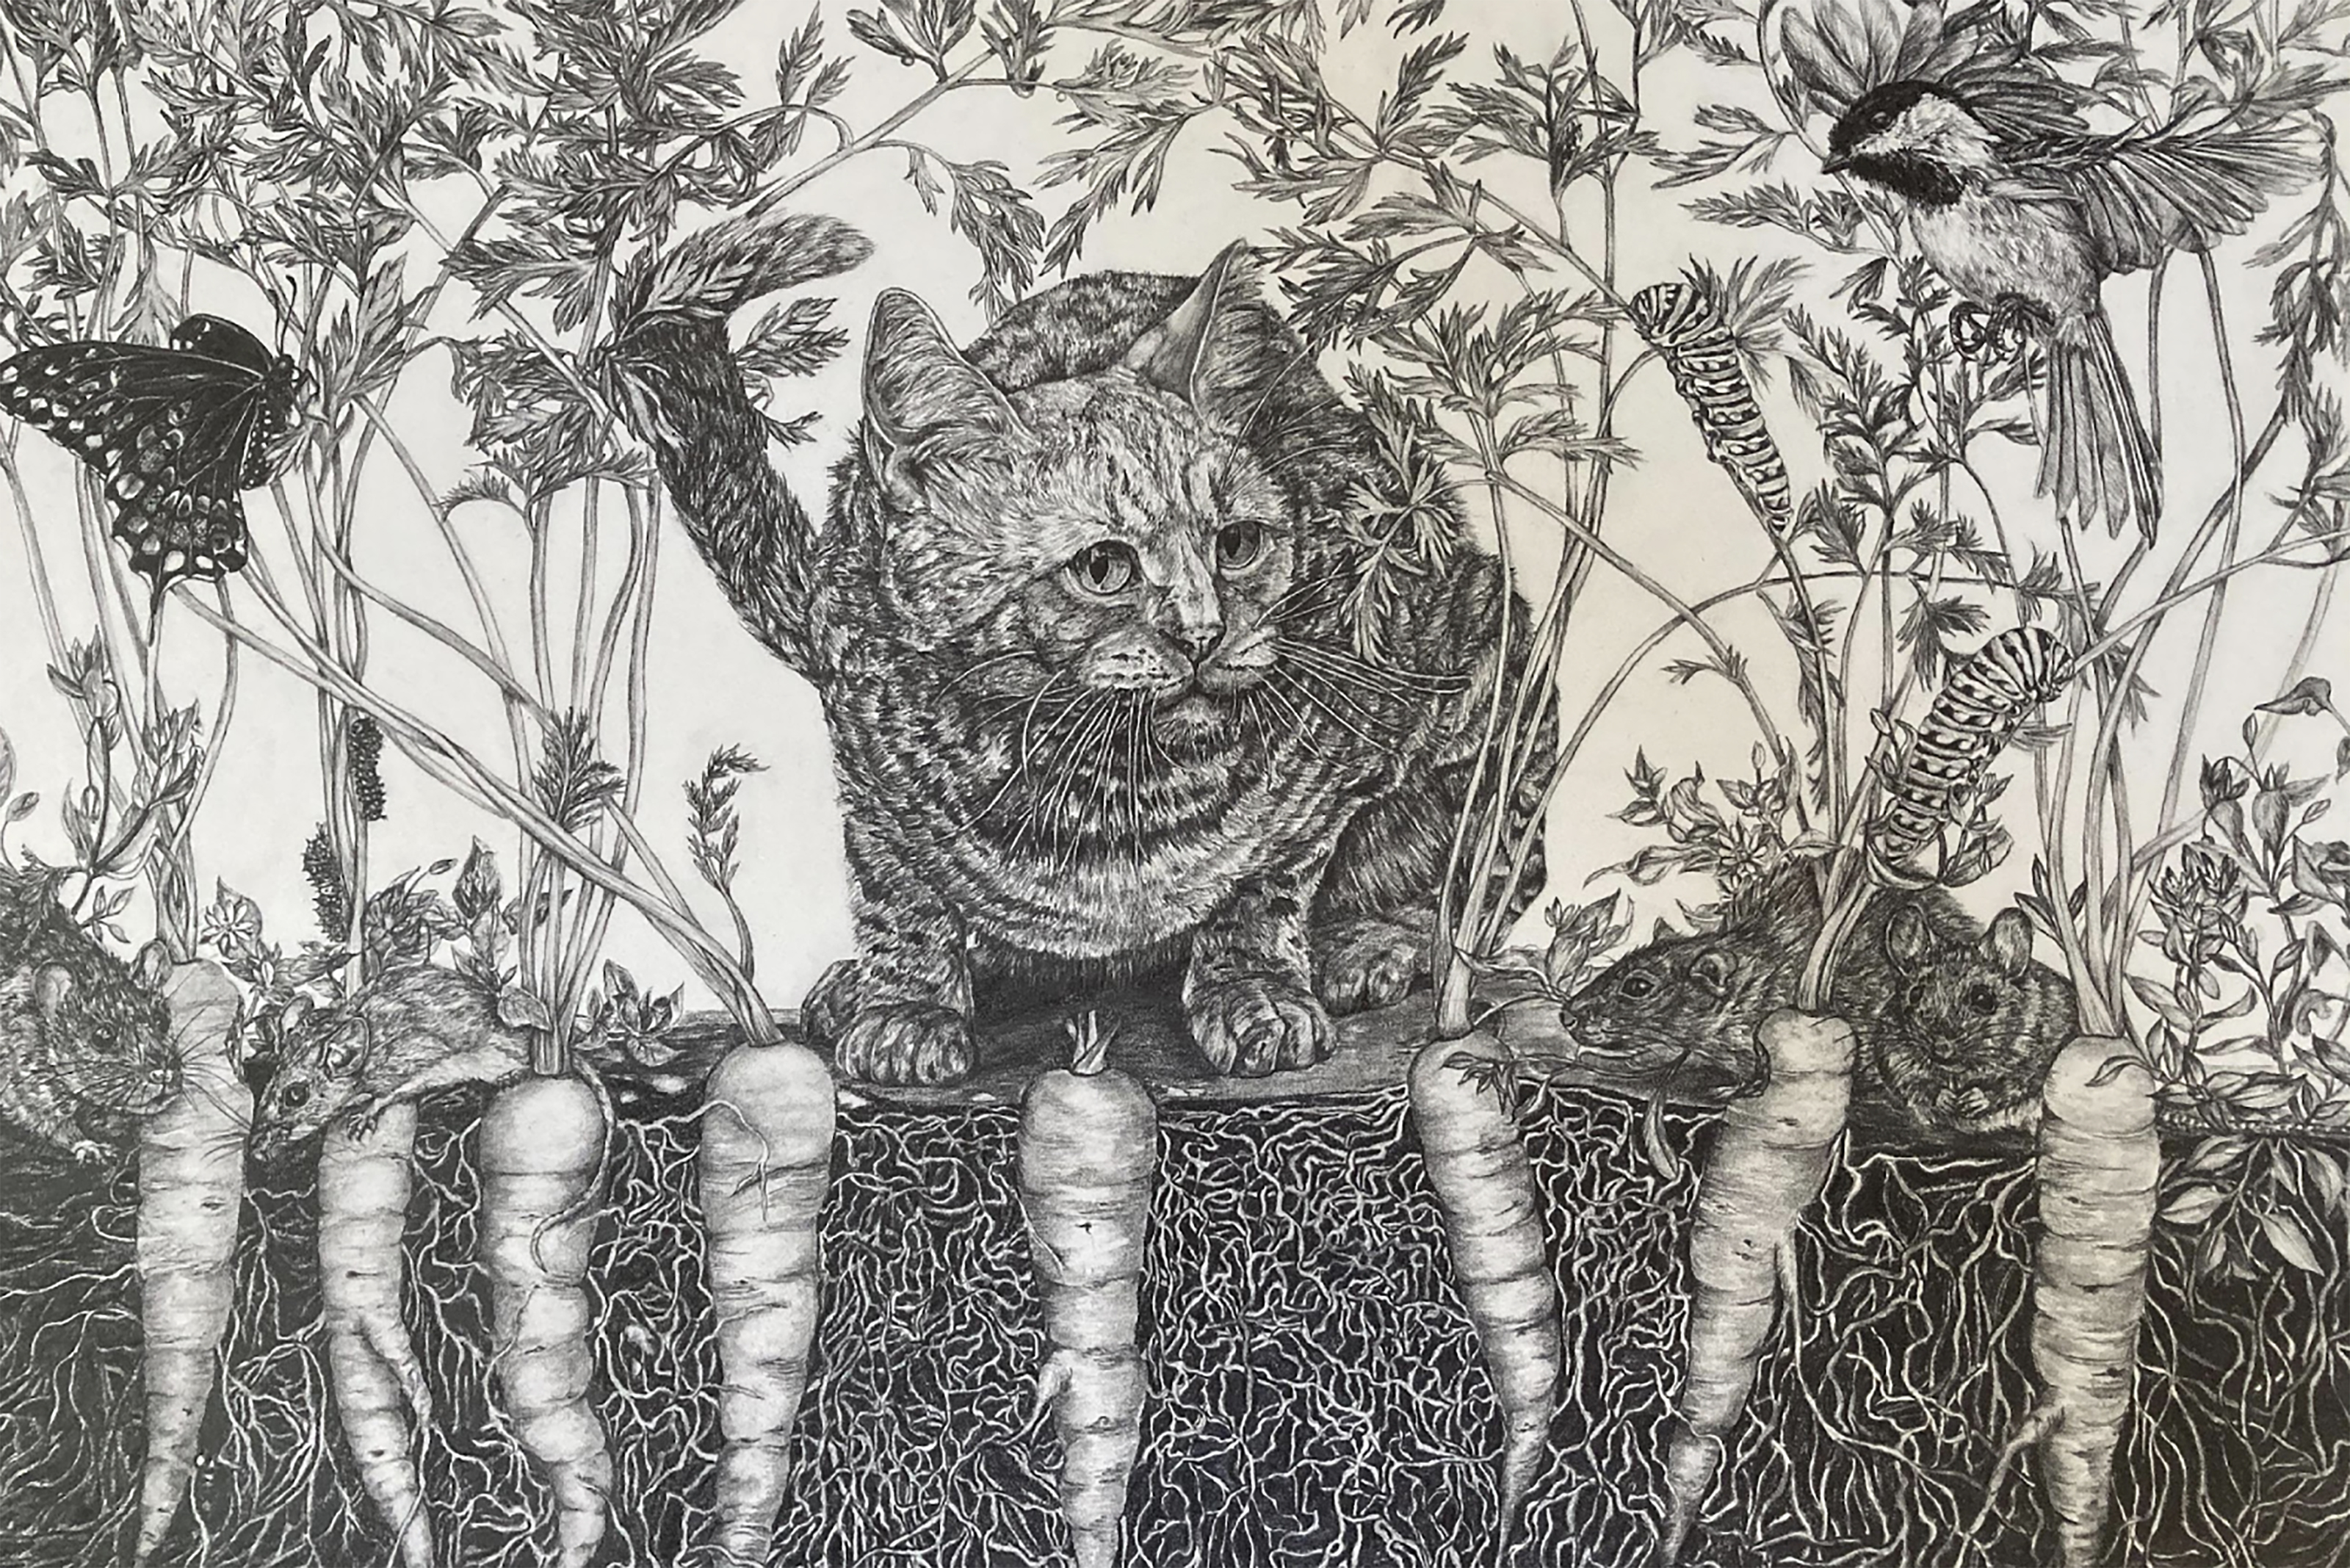 A black and white illustration of a striped tabby cat crouched on the ground surrounded by birds, bugs, rodents, and carrot tops